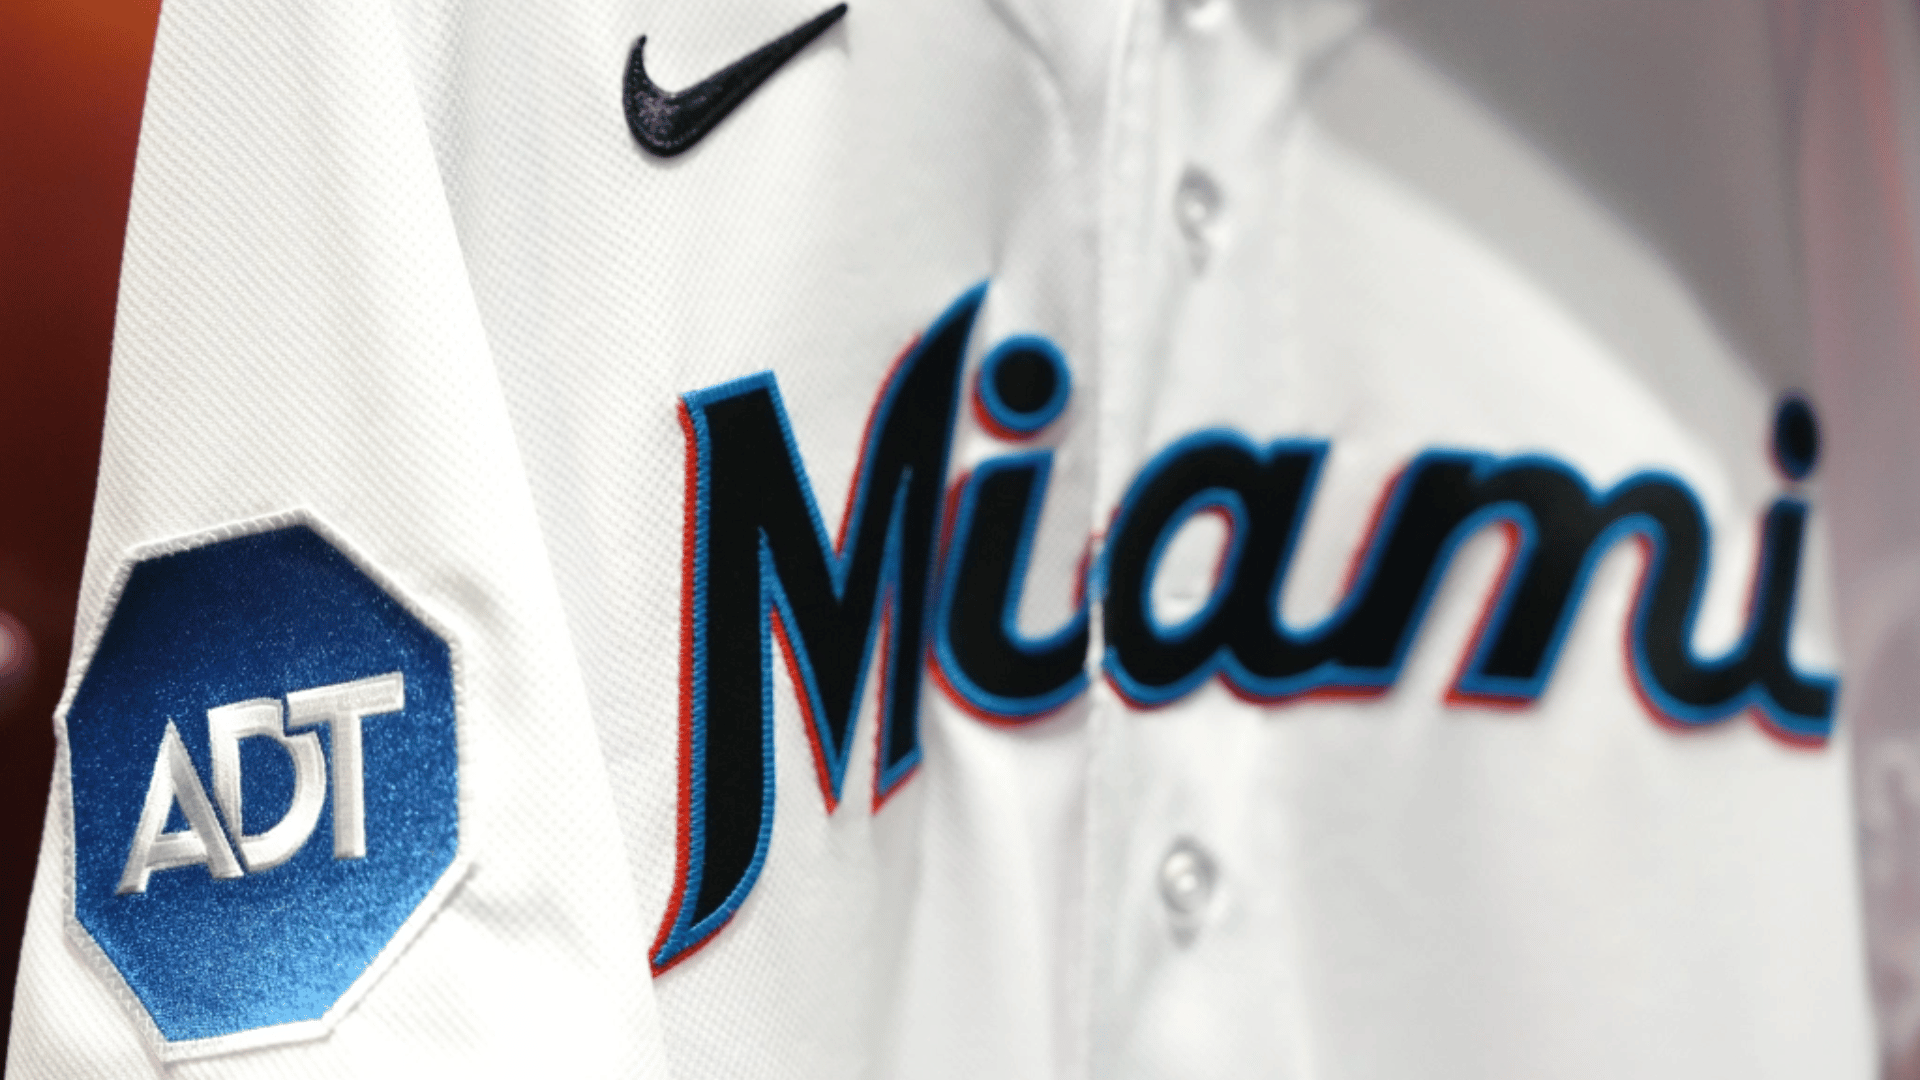 ADT and Miami Marlins announce historic, multi-year partnership